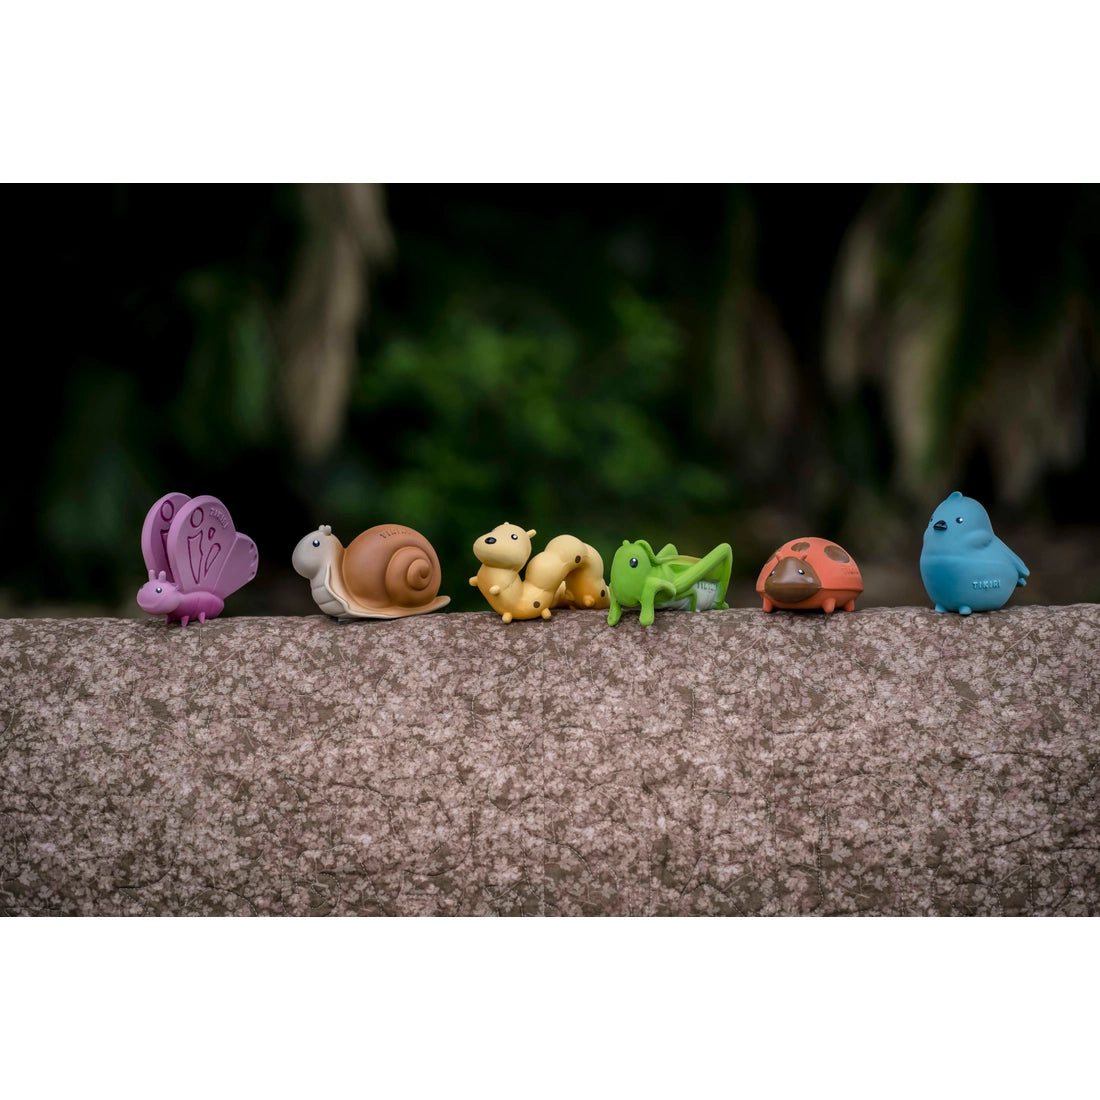 Snail - Natural Organic Rubber Teether, Rattle & Bath Toy